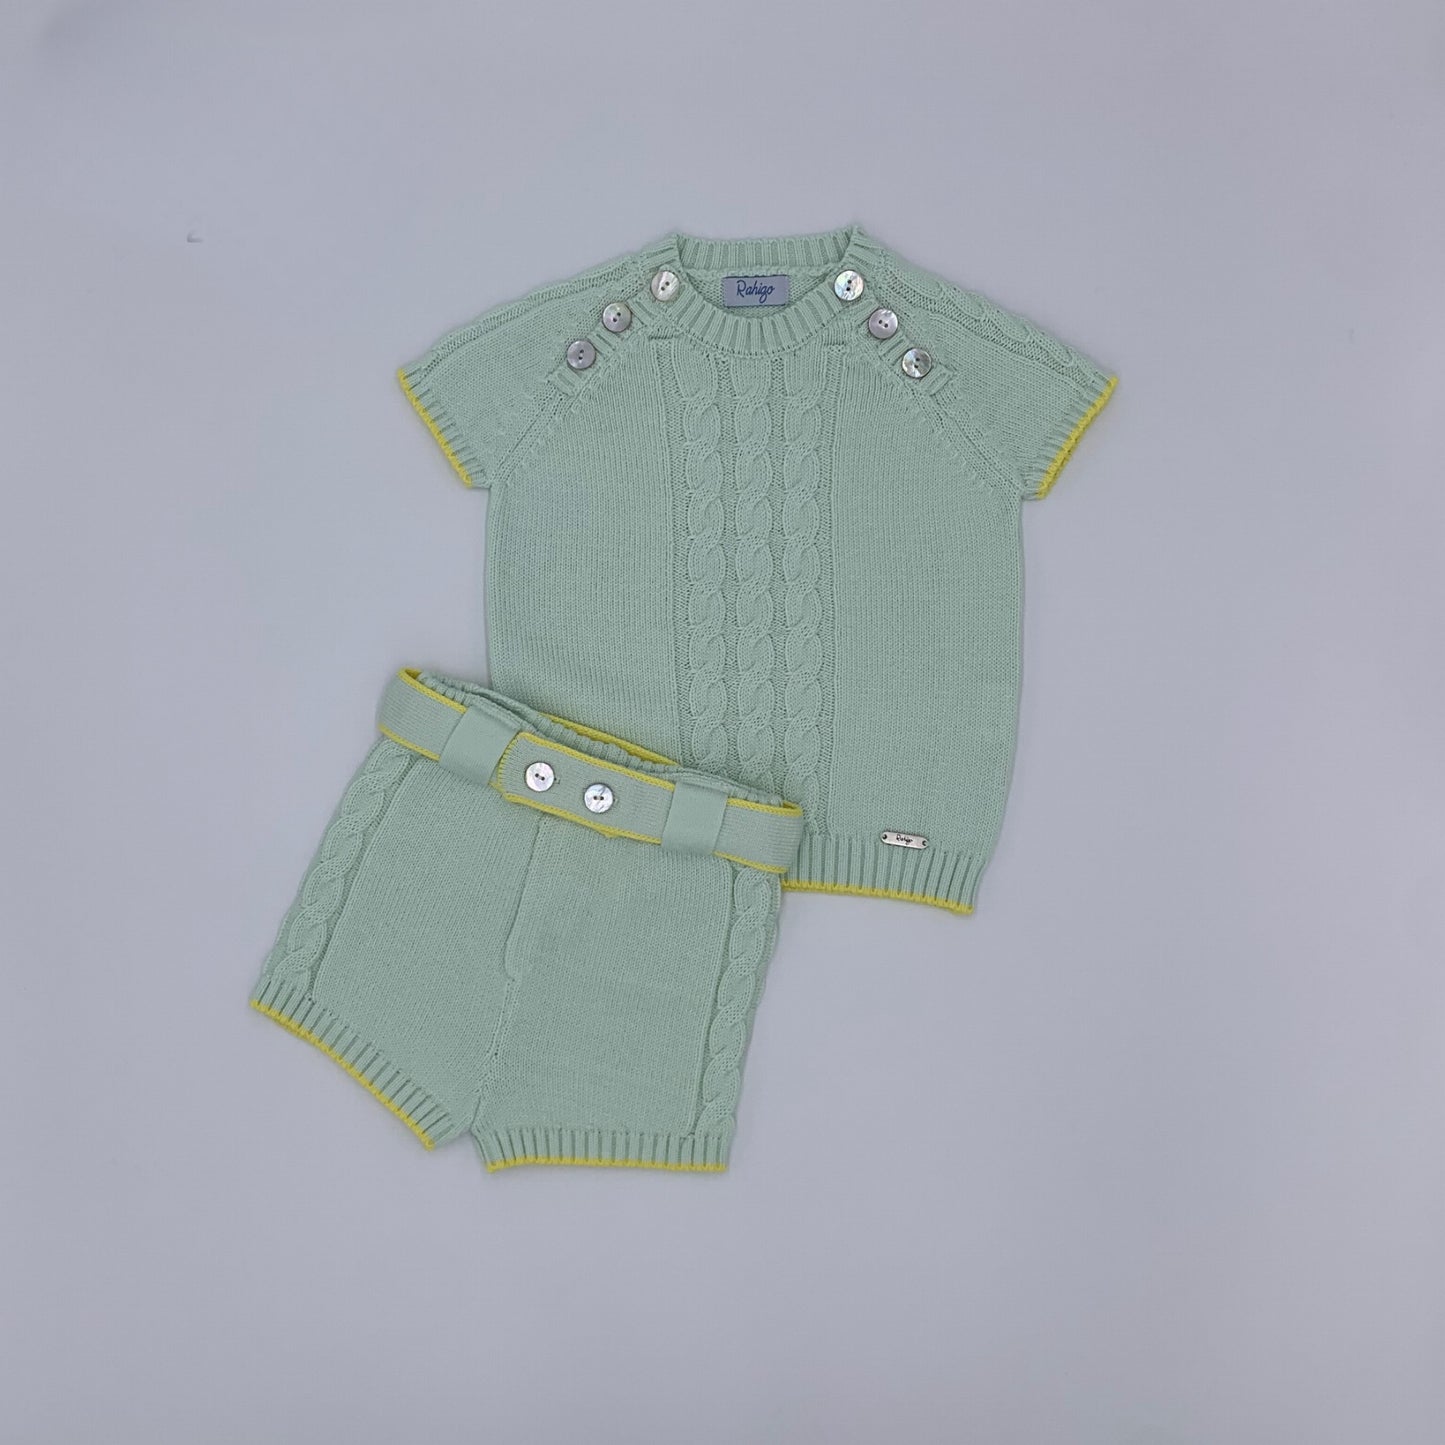 Load image into Gallery viewer, Rahigo mint green and yellow boys shorts set - Adora Childrenswear
